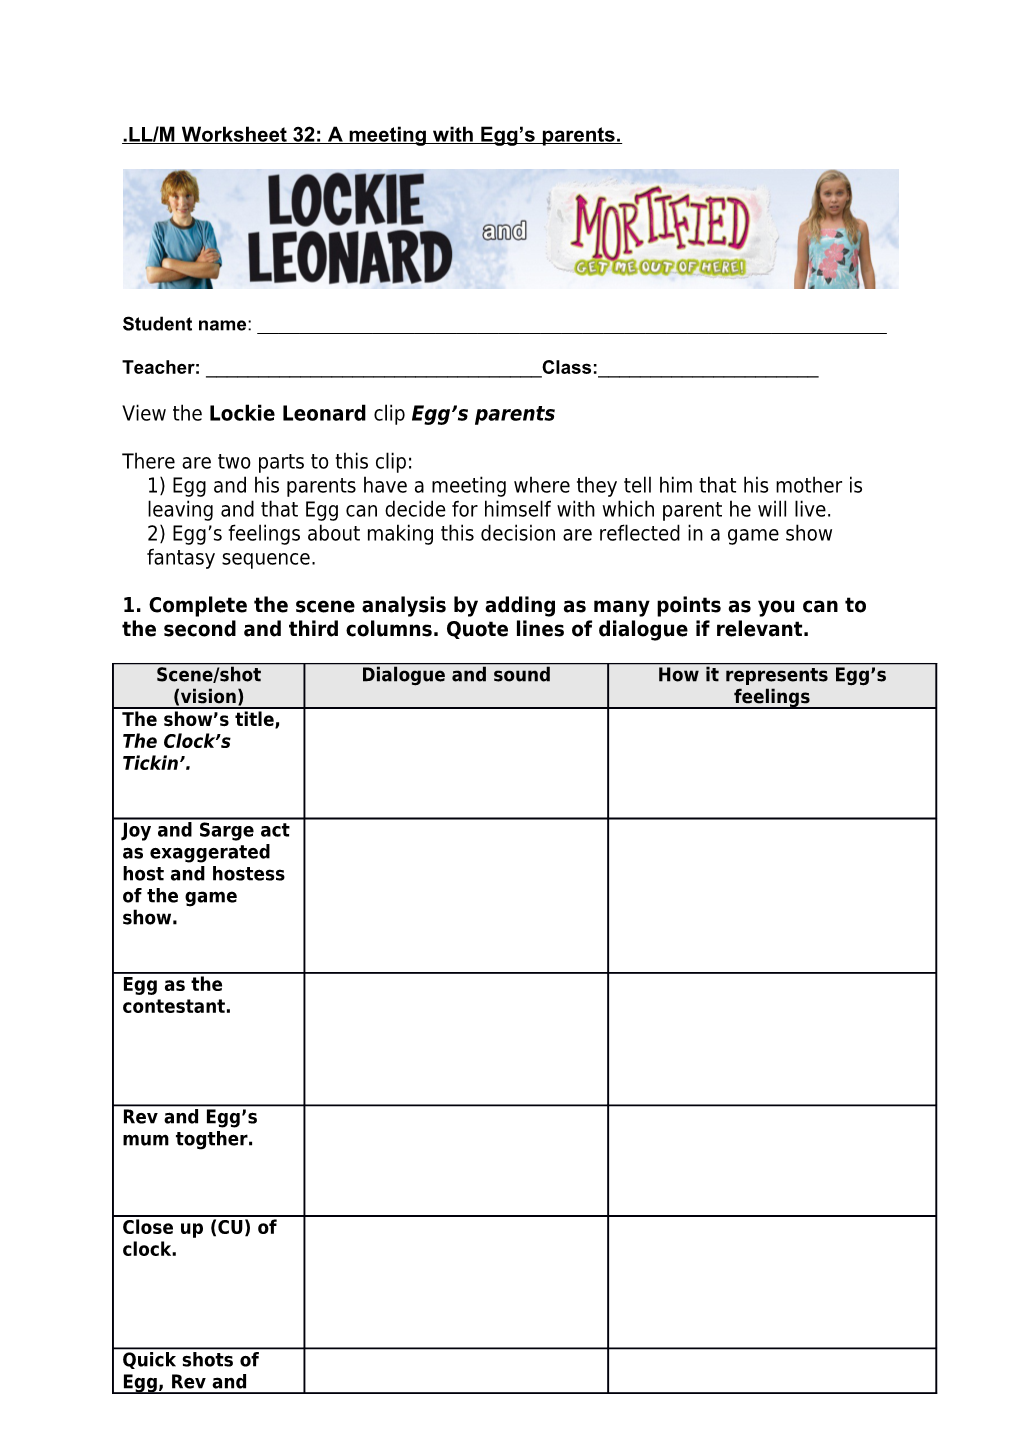 LL/M Worksheet 32: a Meeting with Egg S Parents